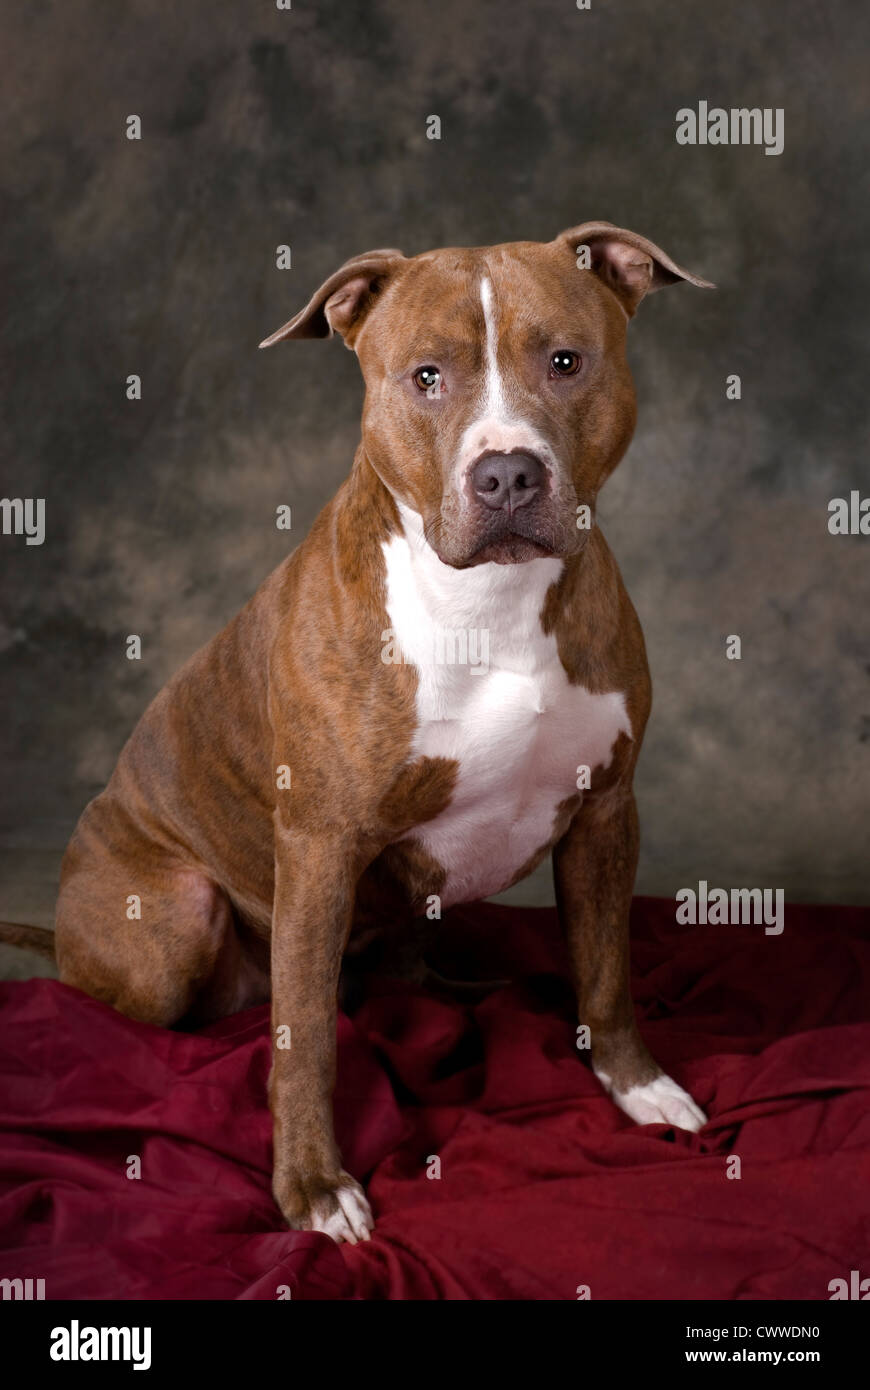 Vertical studio shot of a Pit Bull against a mottled green background. Stock Photo